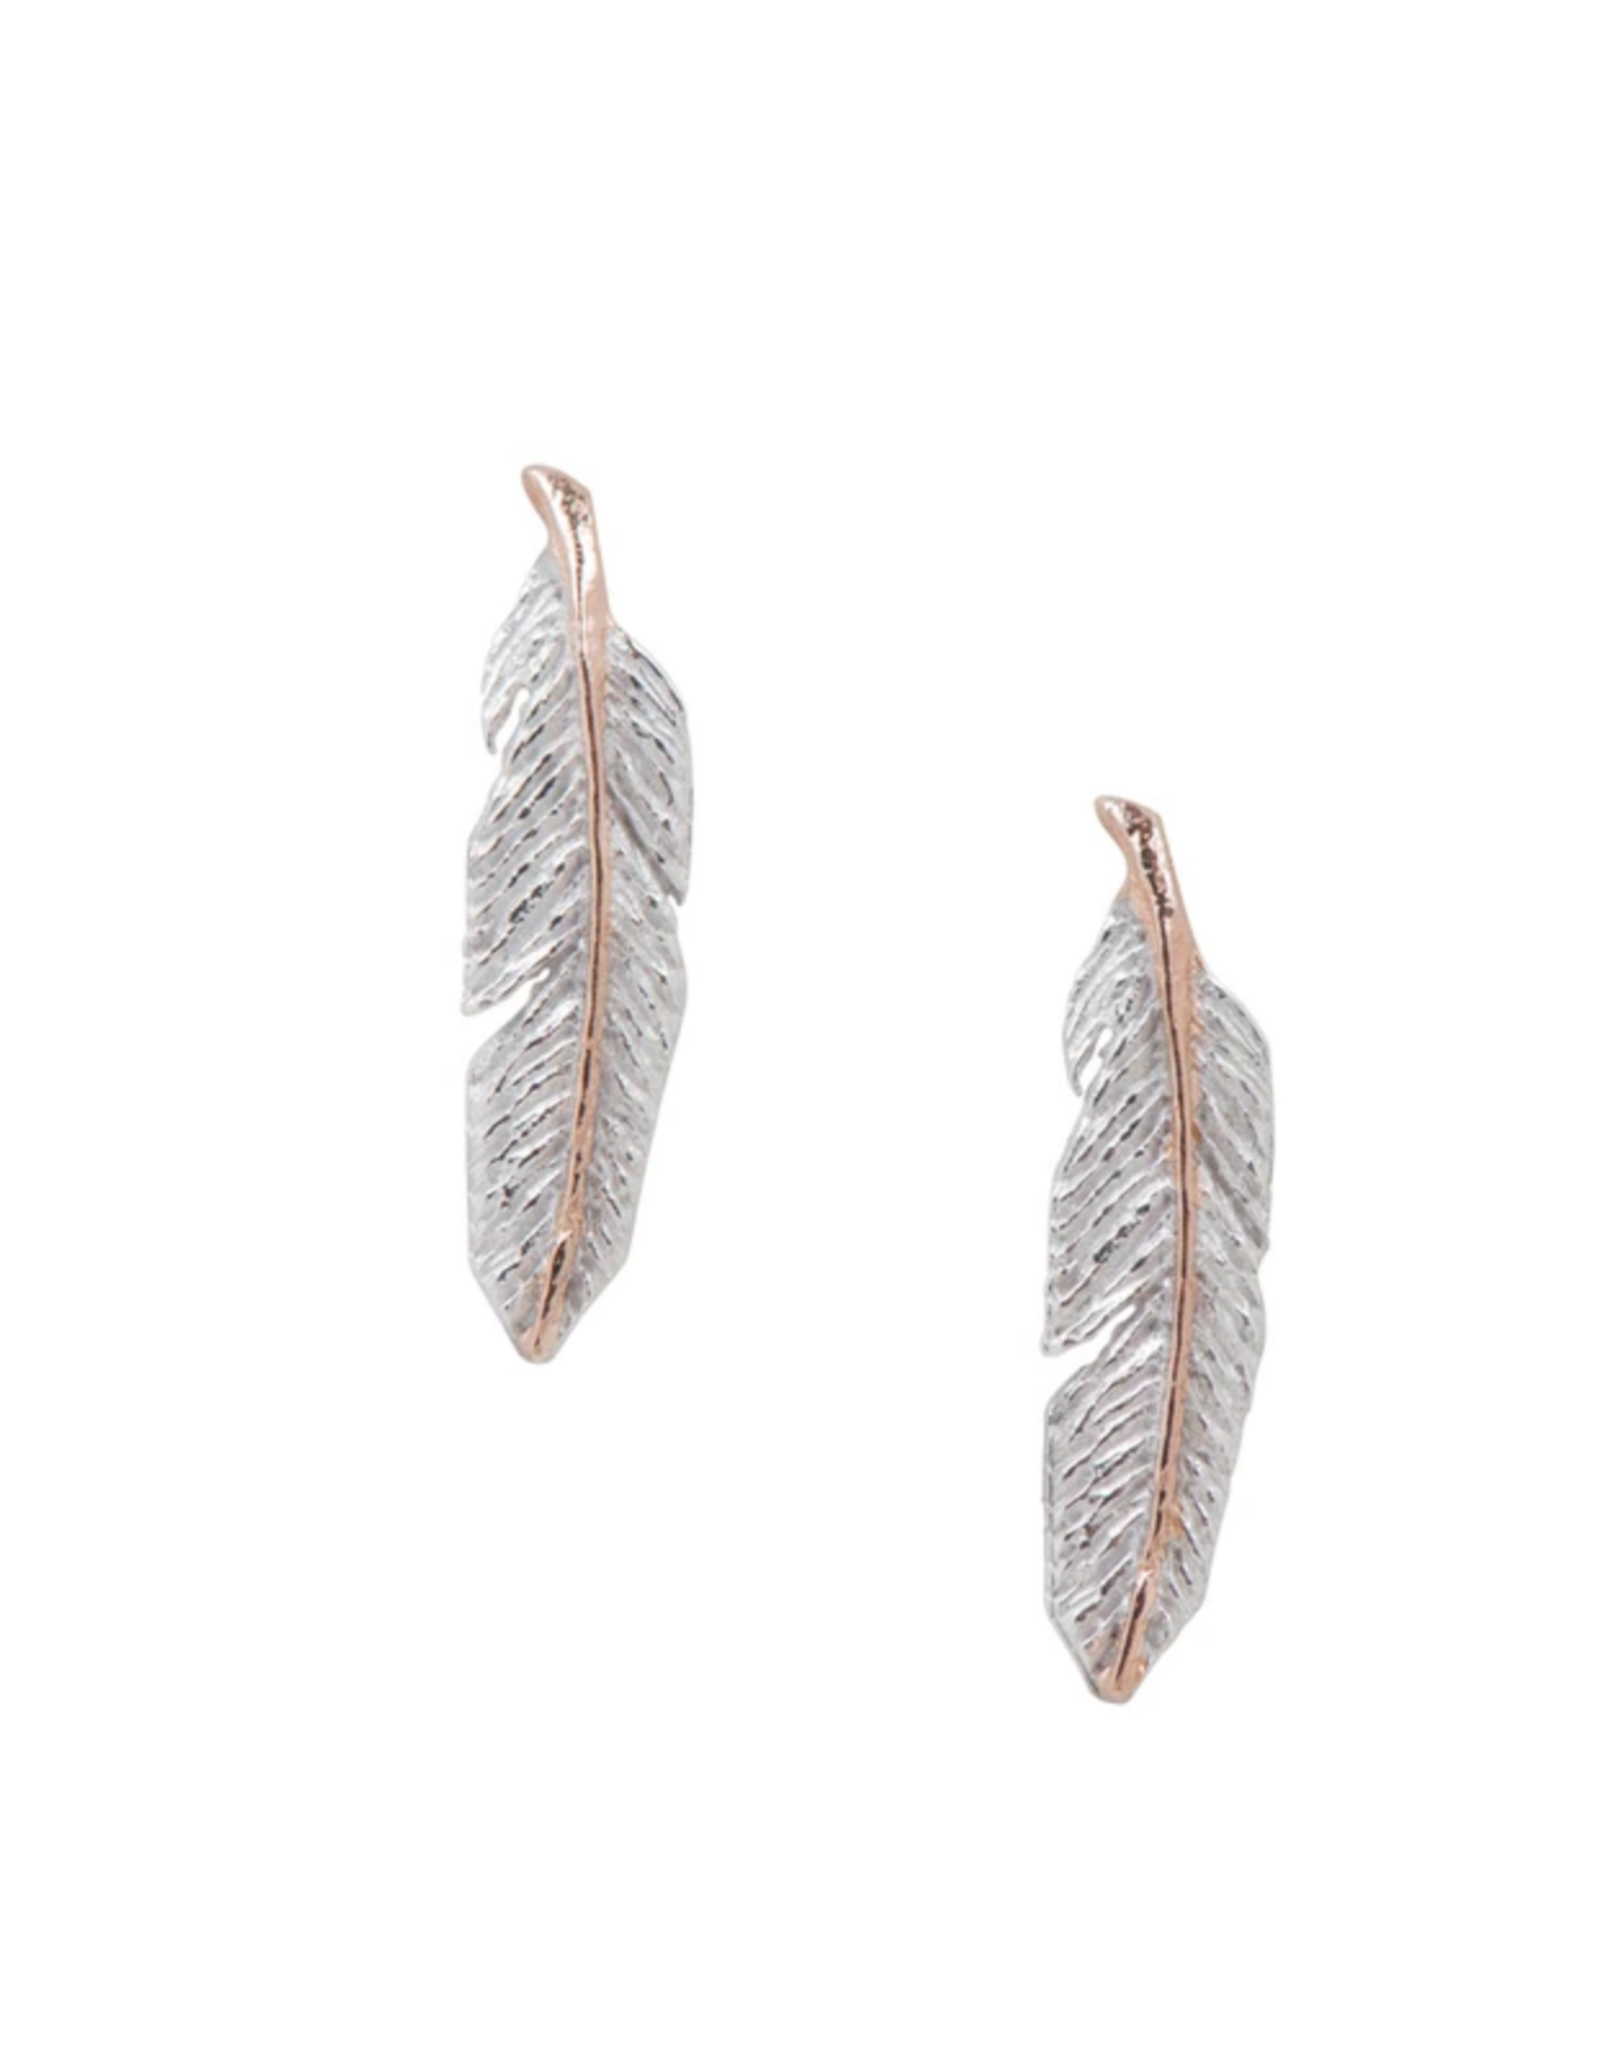 Earring Post Feather Silver With Rose Gold Spine